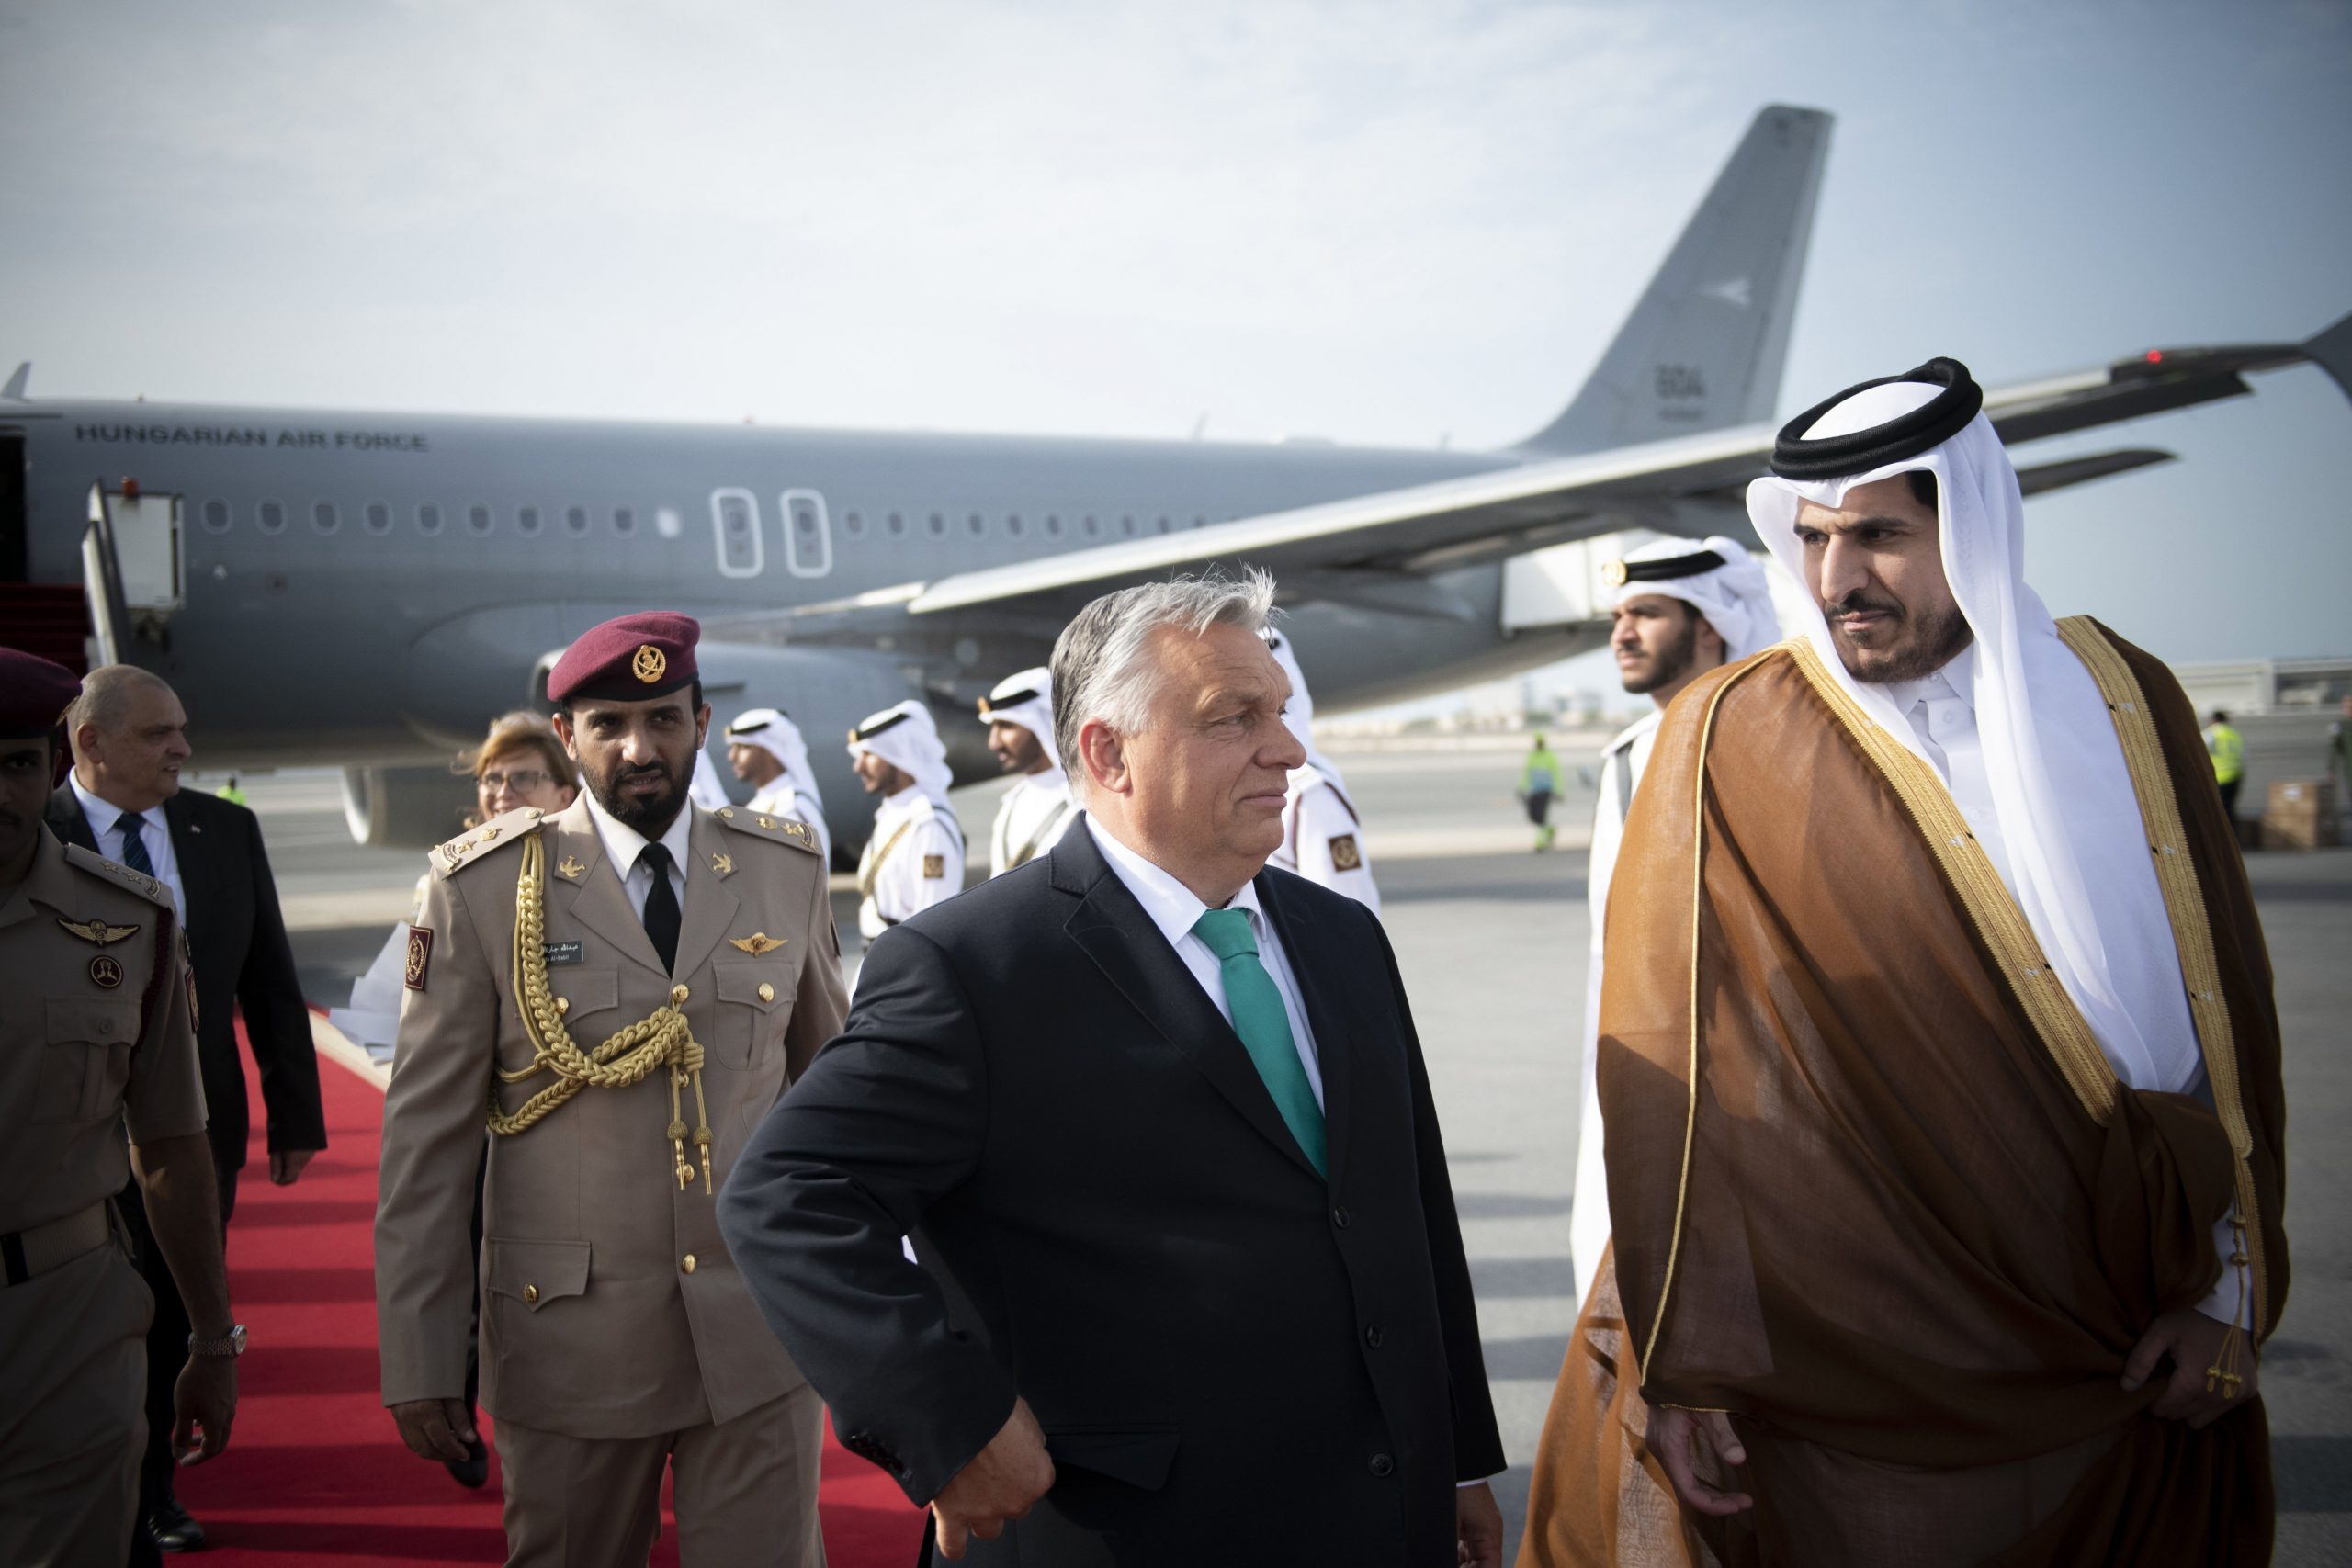 Viktor Orbán Hopes to Boost Energy Supplies with Visit to Qatar